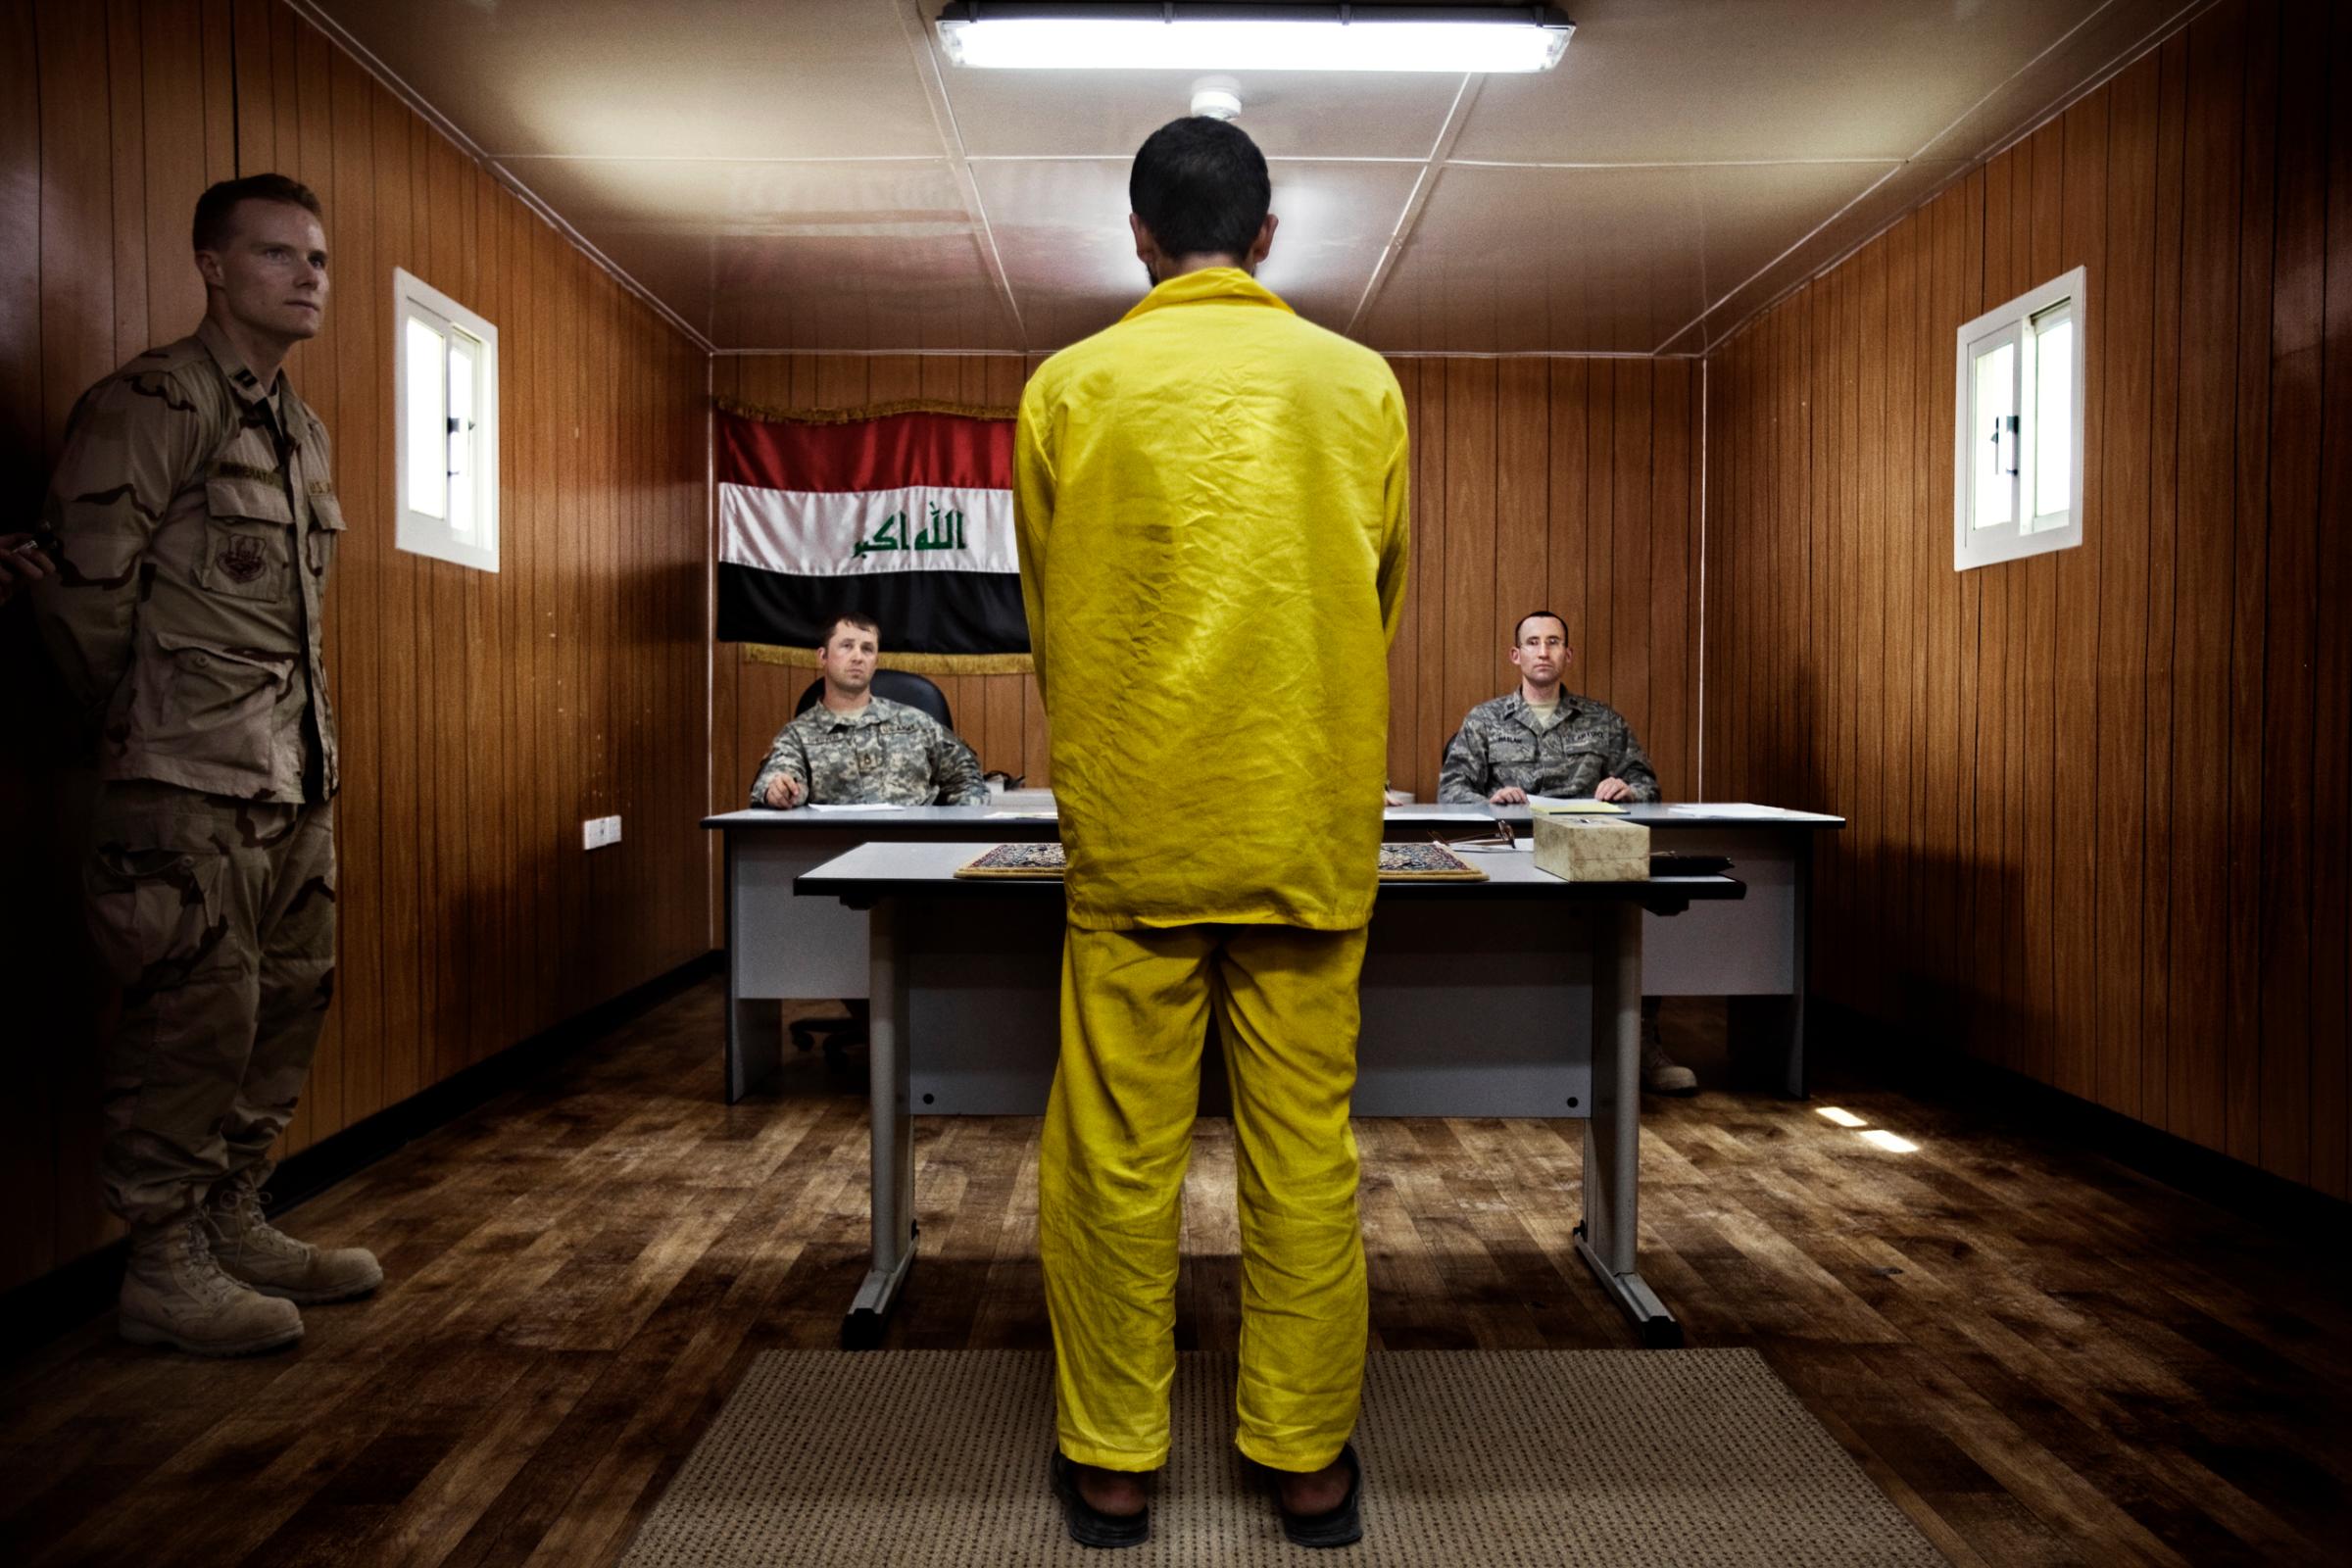 A panel of three American military officers question an Iraqi detainee at Camp Cropper, a U.S. military detention facility in Baghdad, July, 26, 2008. Just under 21,000 Iraqis were held by the U.S. military, outside of the Iraqi justice system, under terms laid out by a U.N. mandate.